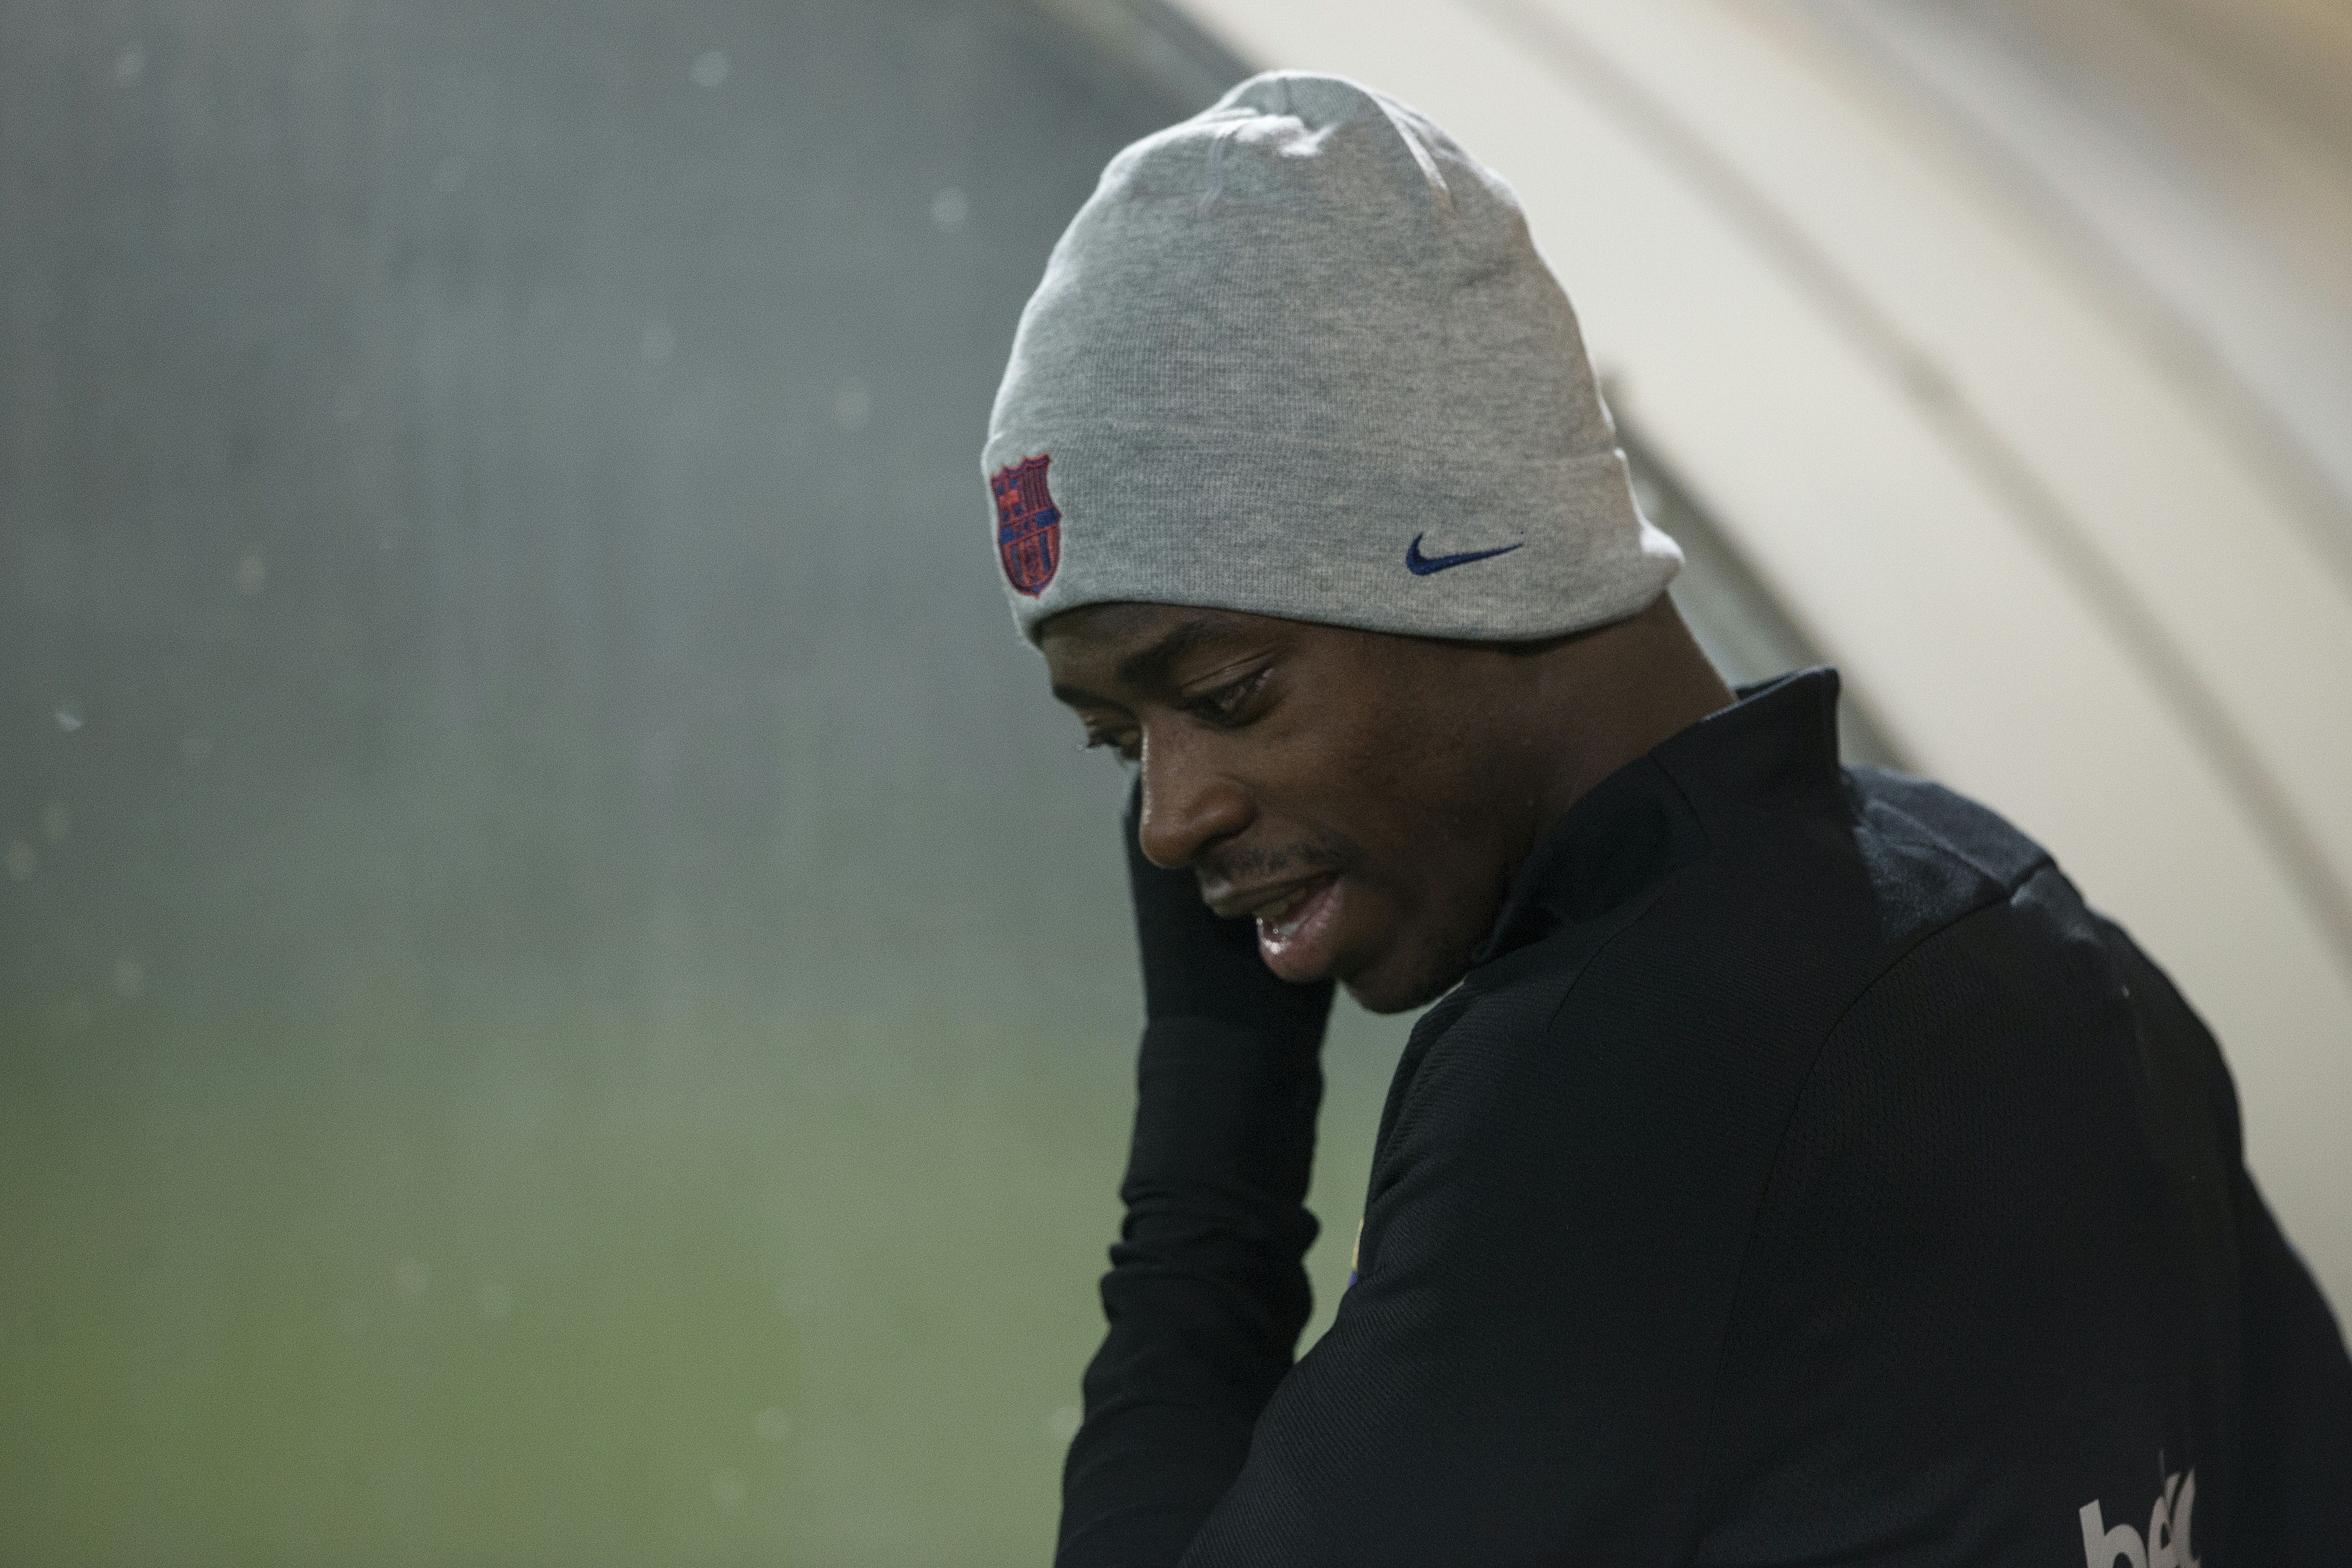 Barcelona's French forward Ousmane Dembele looks on during a training session at the FC Barcelona Joan Gamper sports center in Sant Joan Despi, near Barcelona, on December 9, 2017.  / AFP PHOTO / Josep LAGO        (Photo credit should read JOSEP LAGO/AFP/Getty Images)